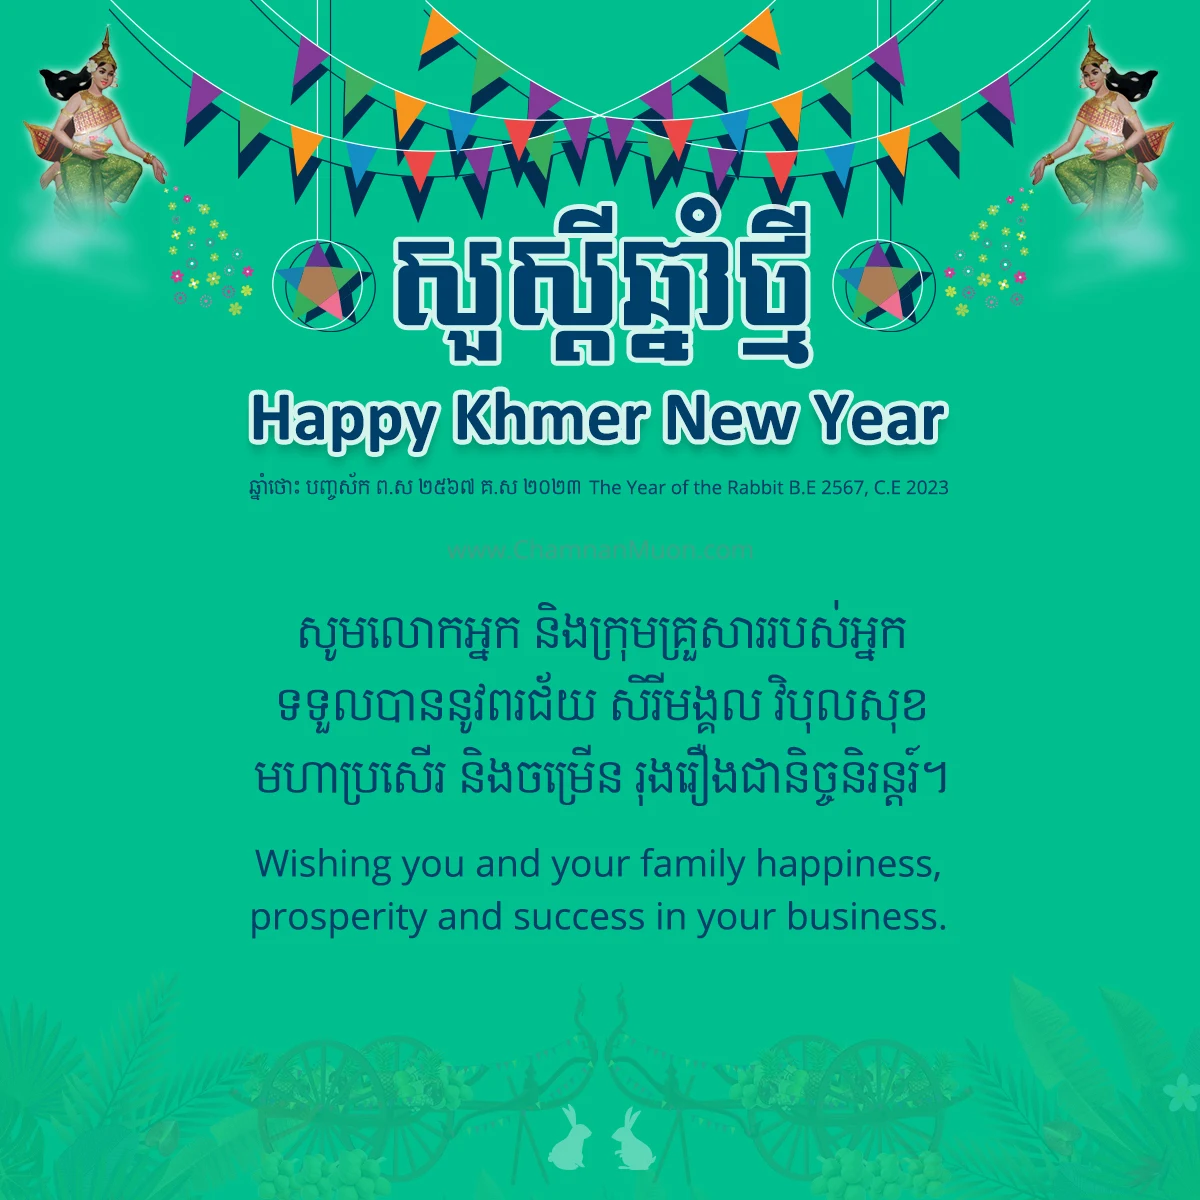 [Greeting Card] Happy Khmer New Year 2023